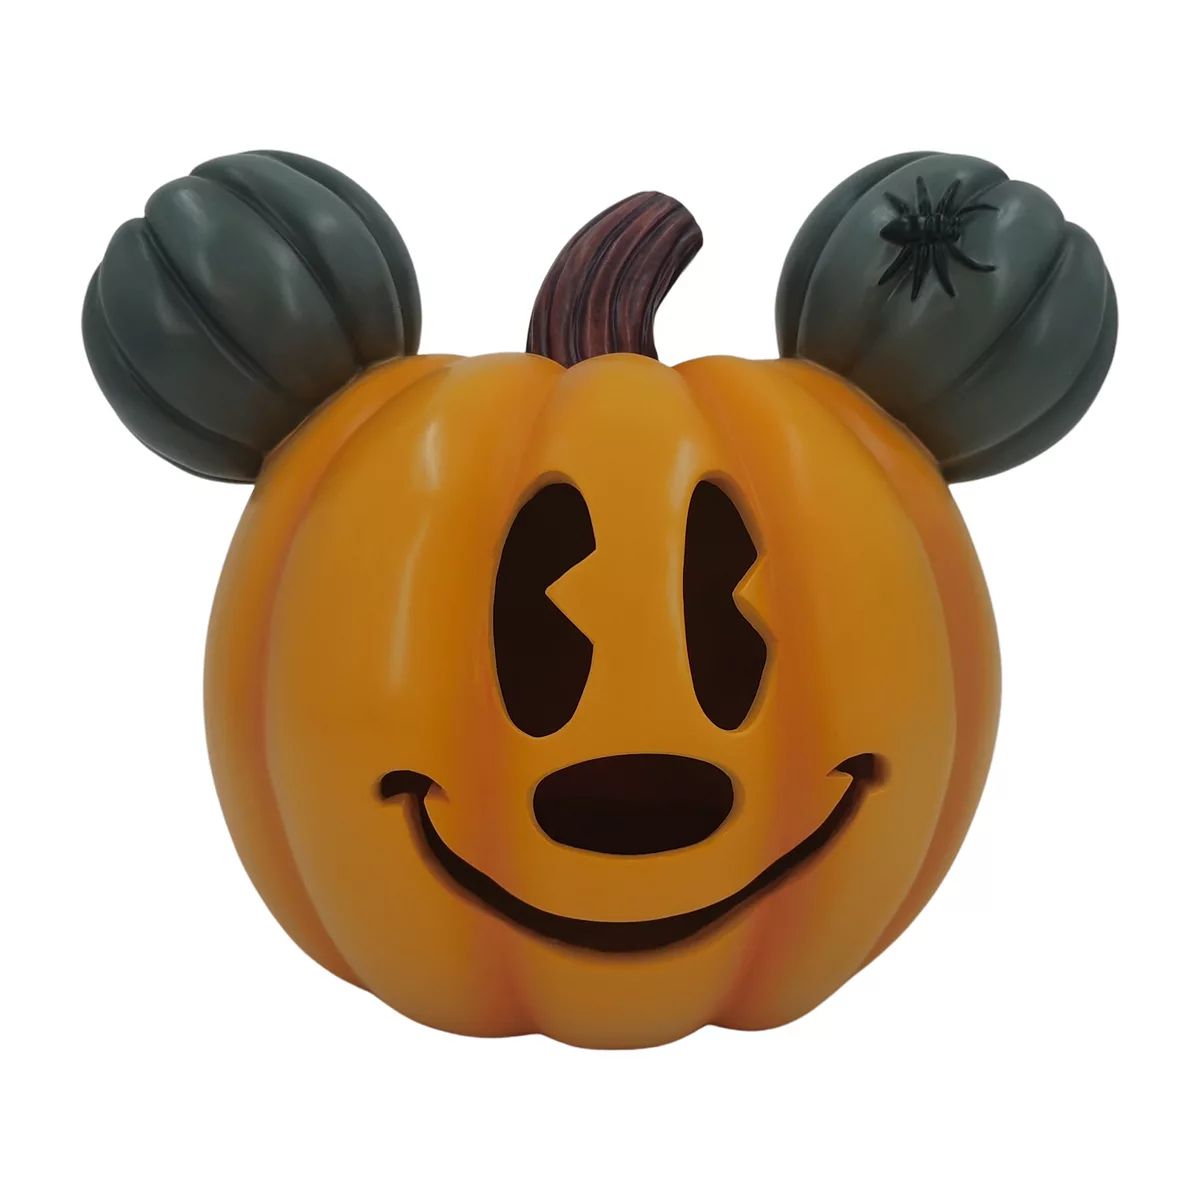 Disney's Mickey Mouse Celebrate Together™ Halloween Cut Out Pumpkin | Kohl's